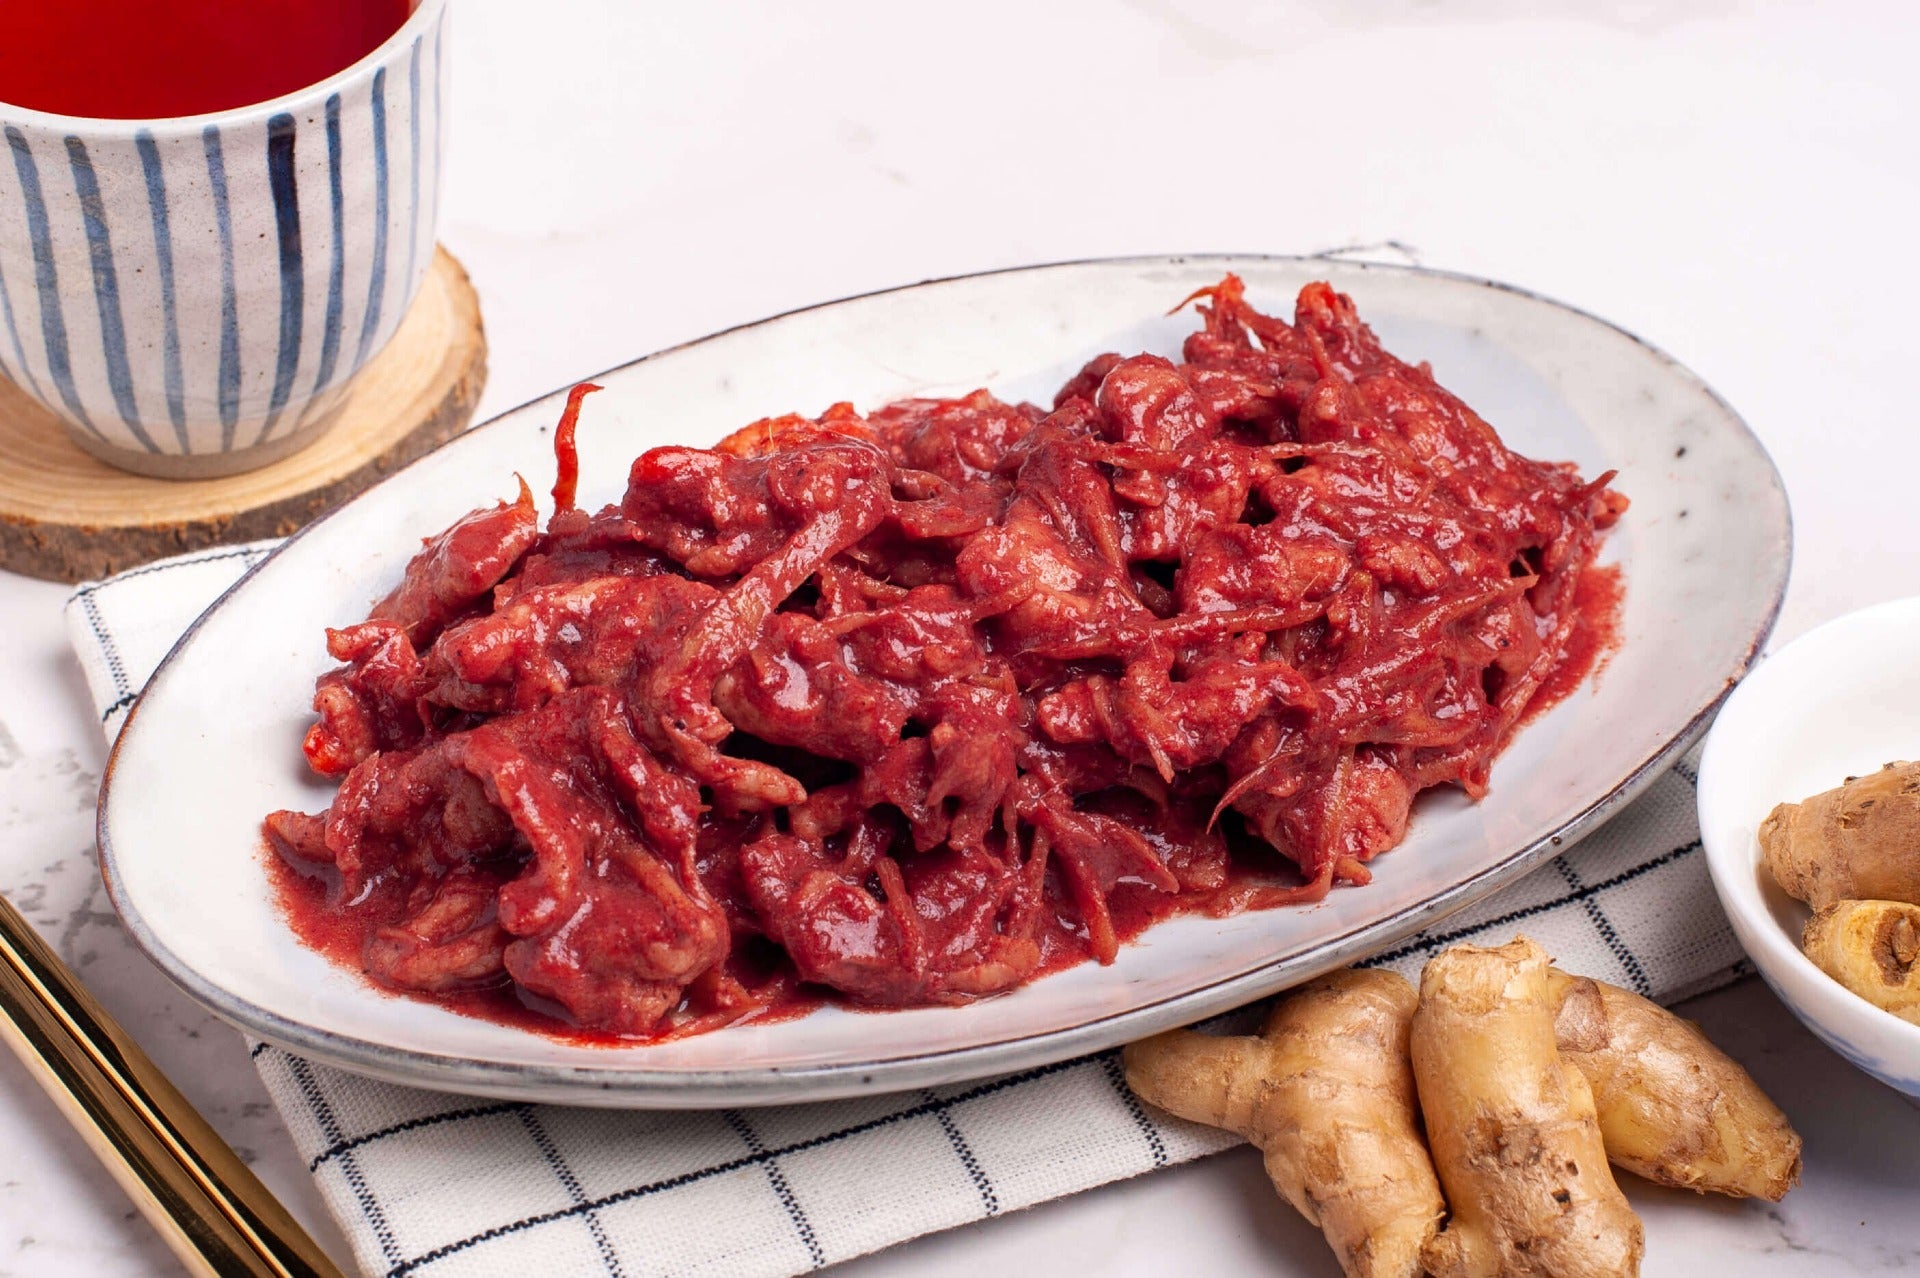 traditional confinement fuzhou red glutinous rice wine pork that will warm your body after childbirth